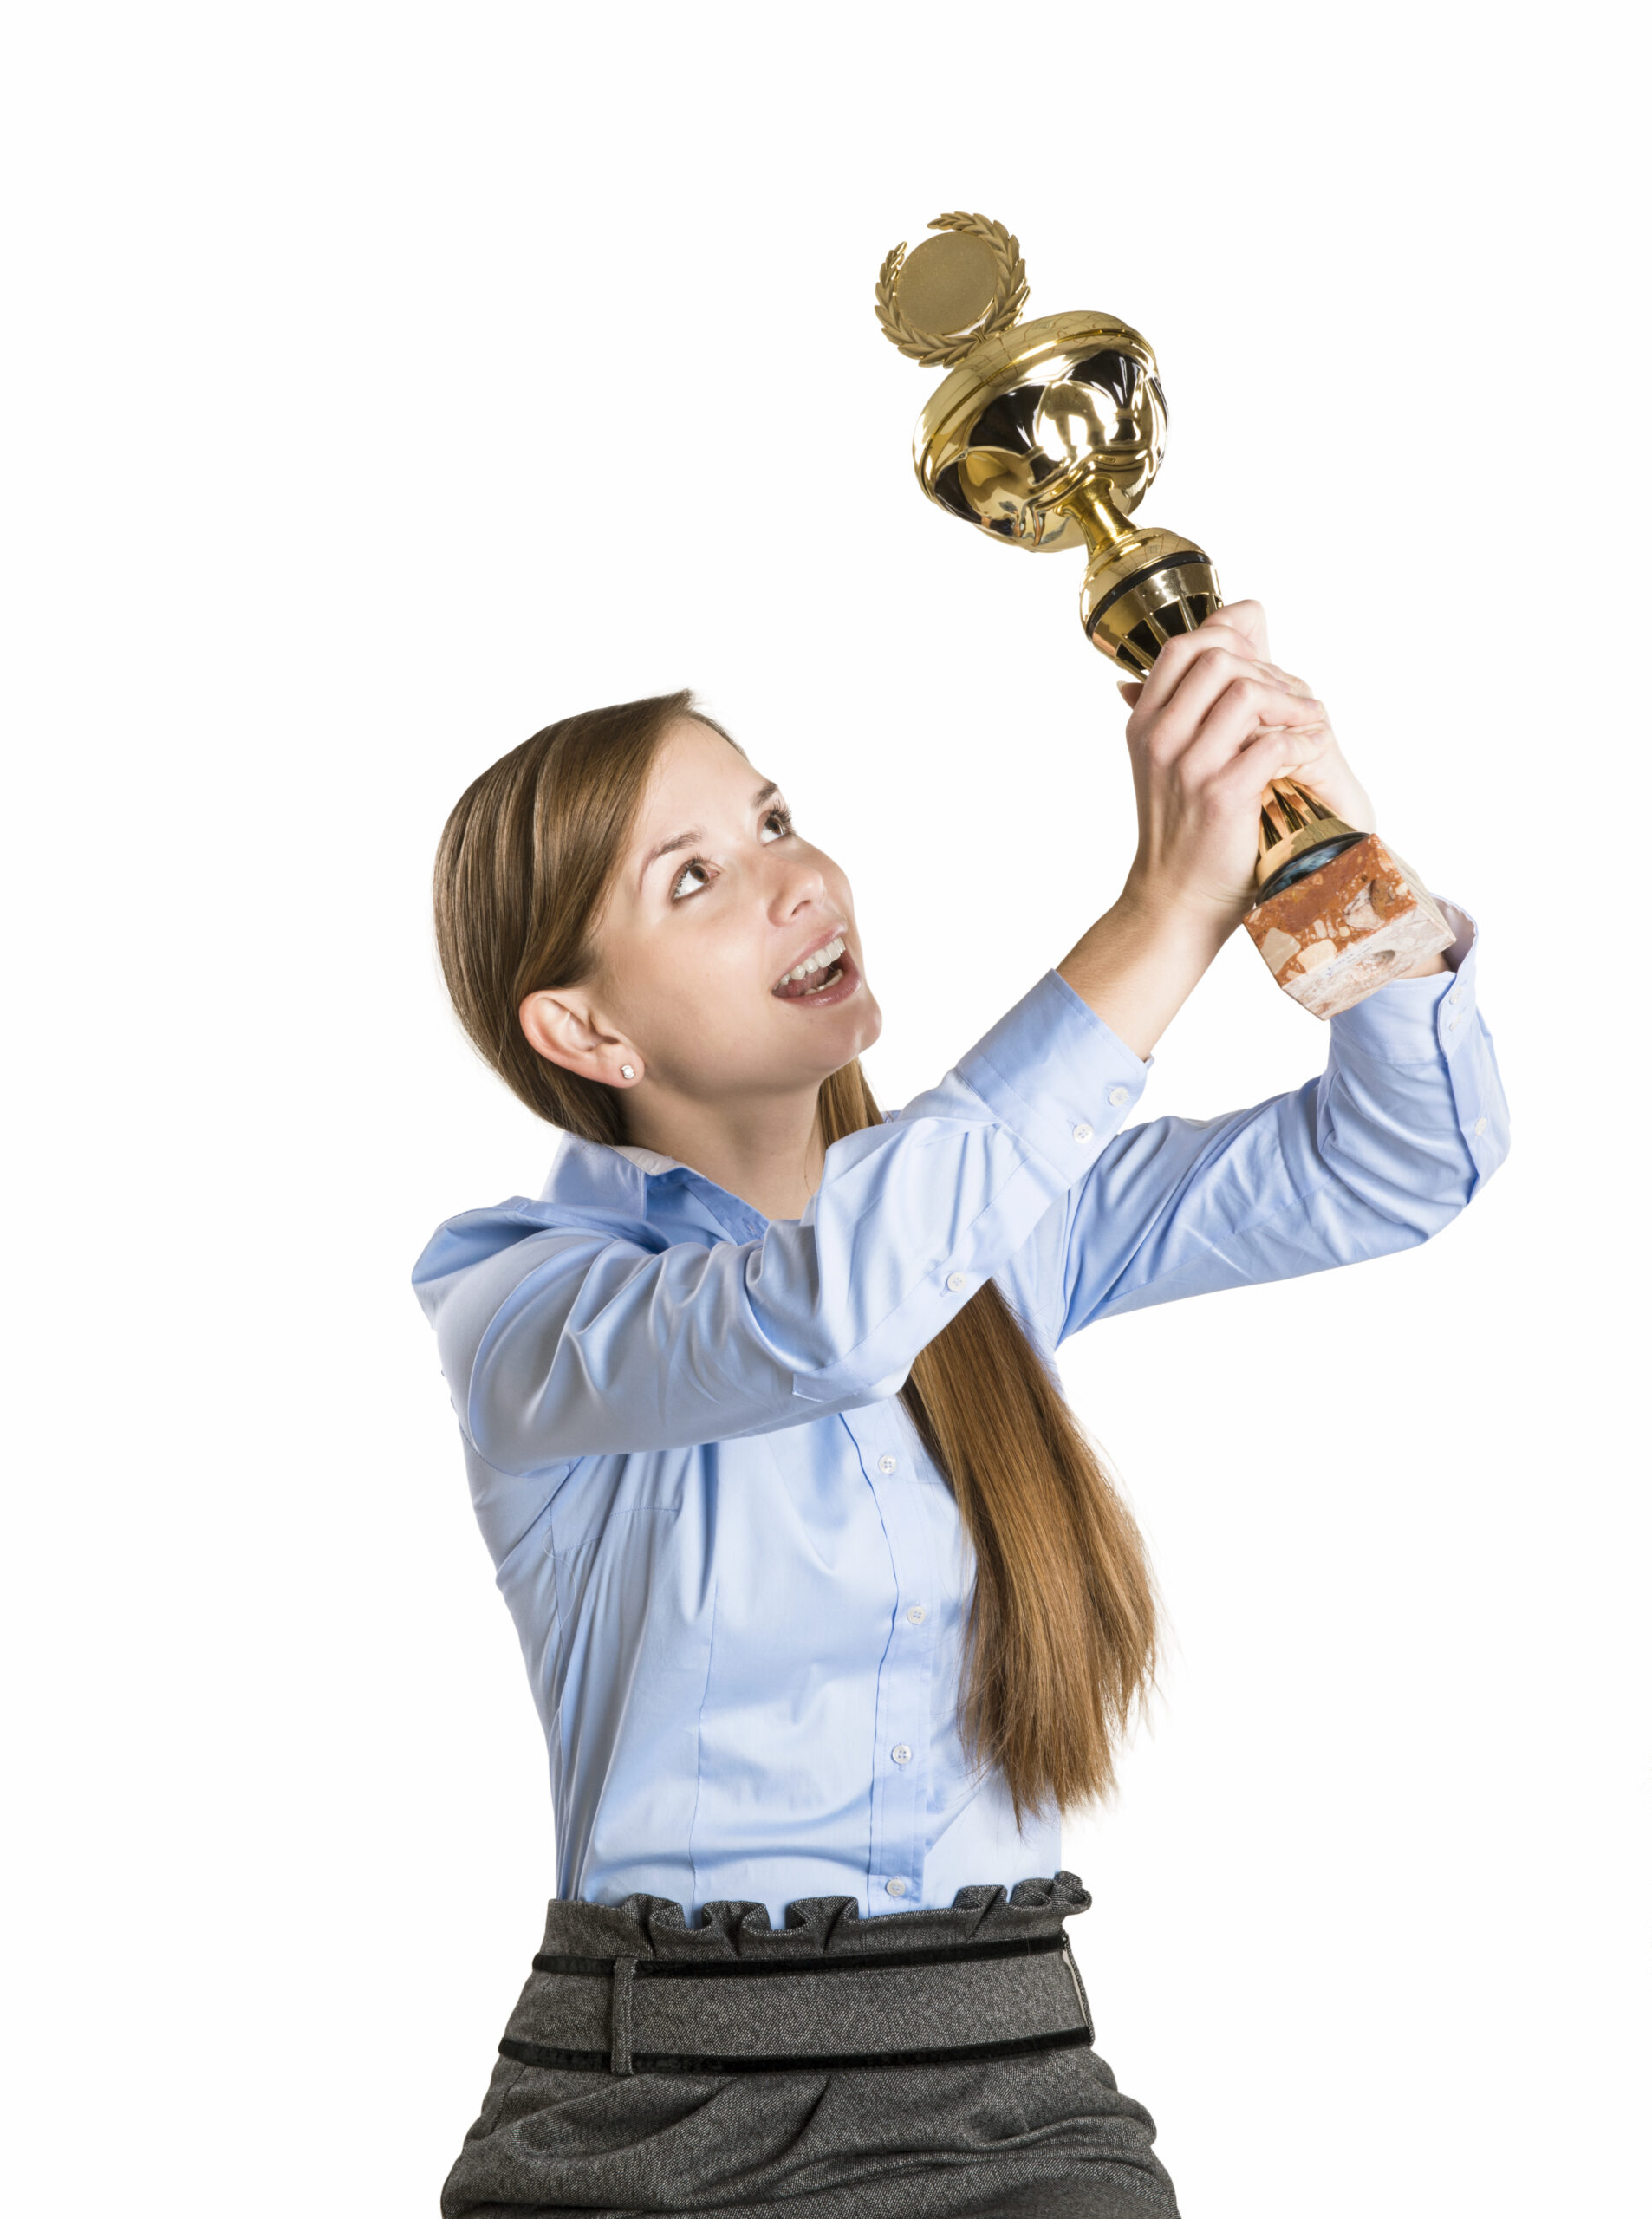 graphicstock-portrait-of-successful-business-woman-with-trophy_HA_XNJiW--scaled Getting Real About Weight Loss: 5 Effective Strategies That Actually Work